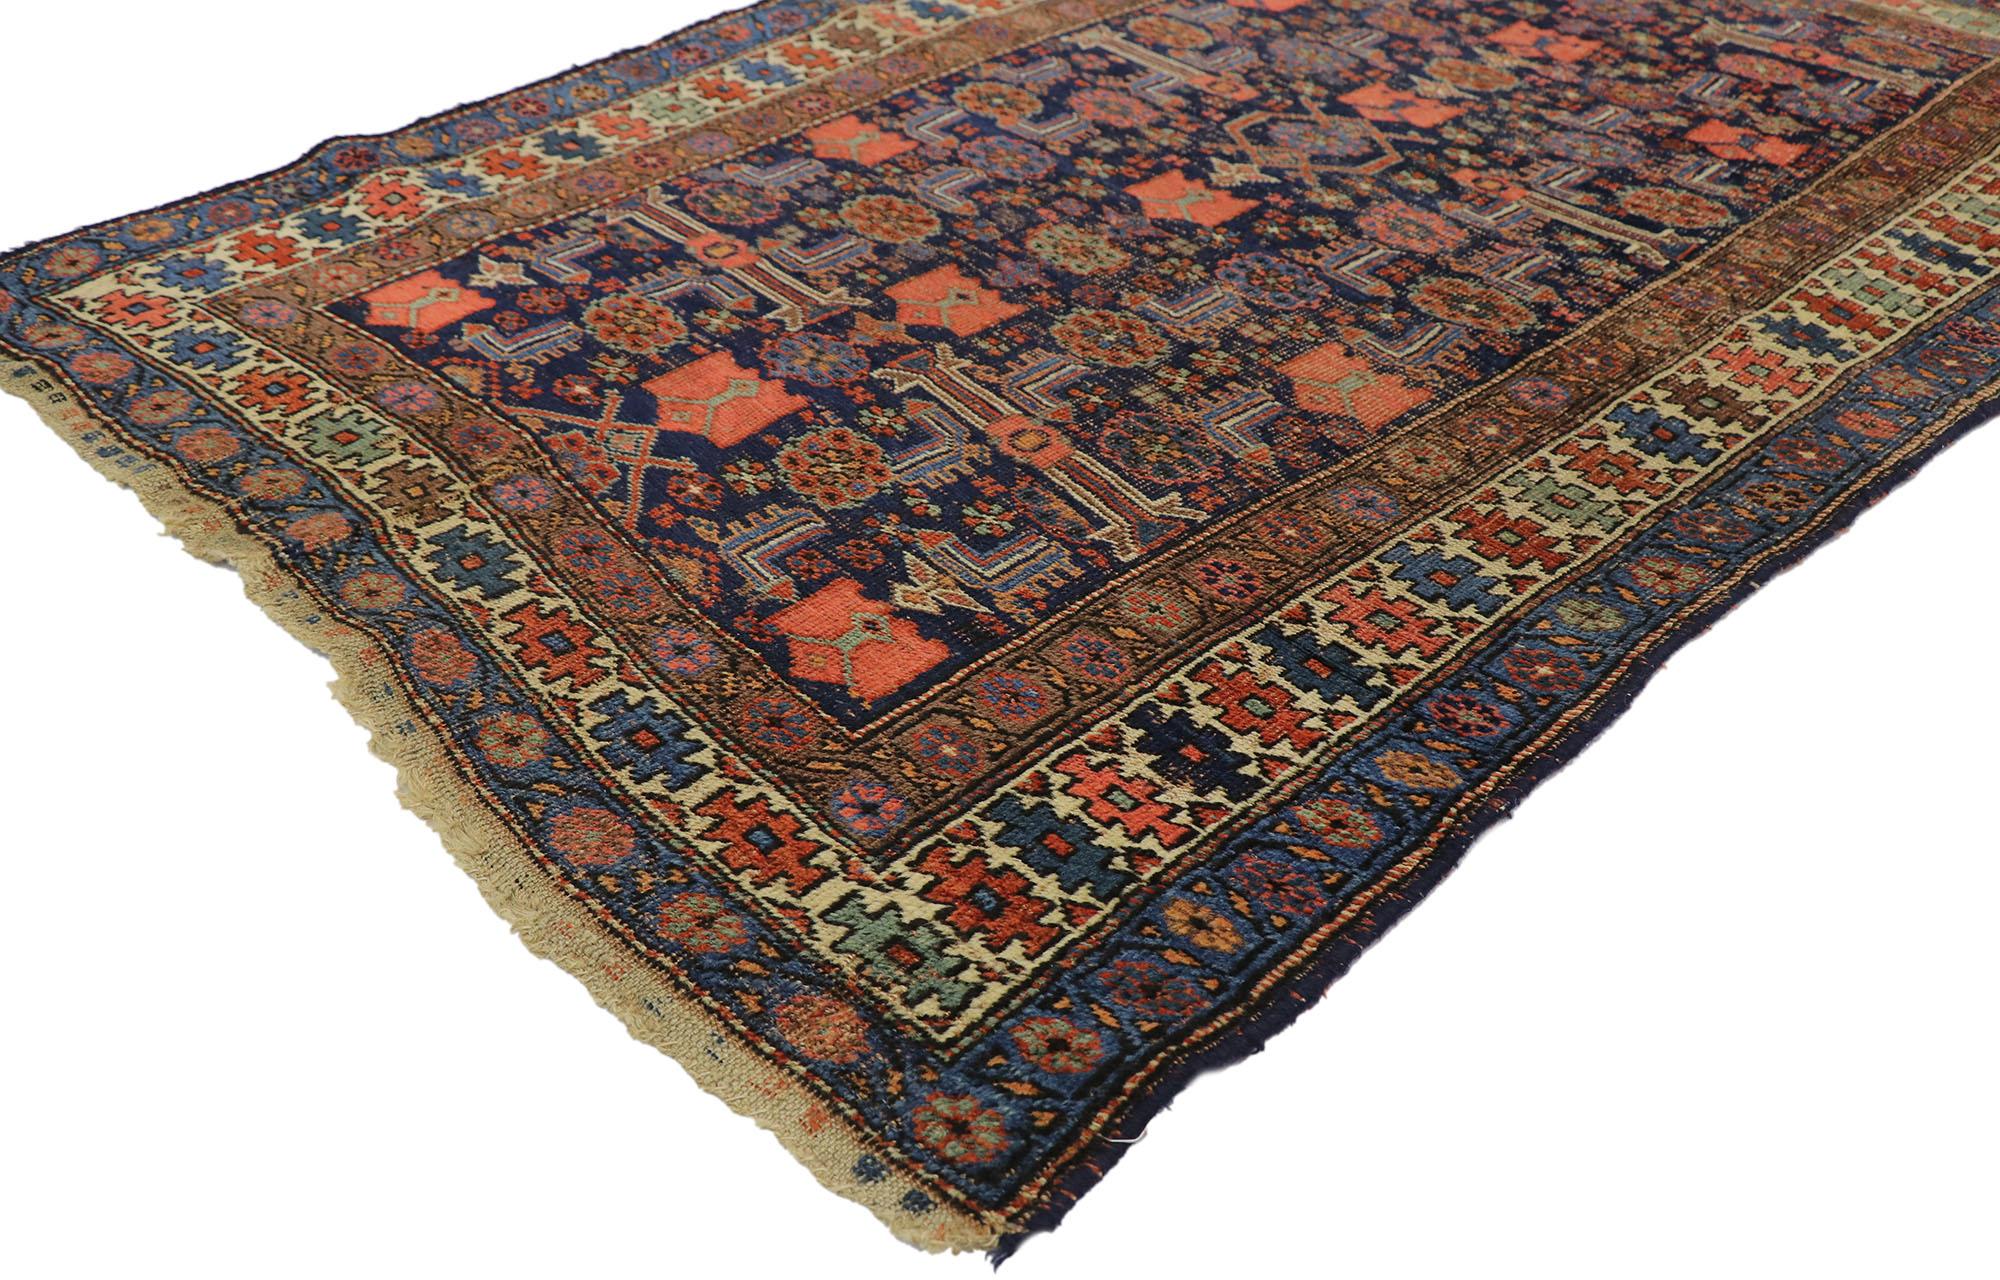 77611, distressed antique Persian Bijar rug with modern rustic tribal style 03'10 x 05'09. With timeless appeal and perfectly worn-in charm with rustic sensibility, this hand-knotted wool distressed antique Persian Bijar rug is a captivating vision